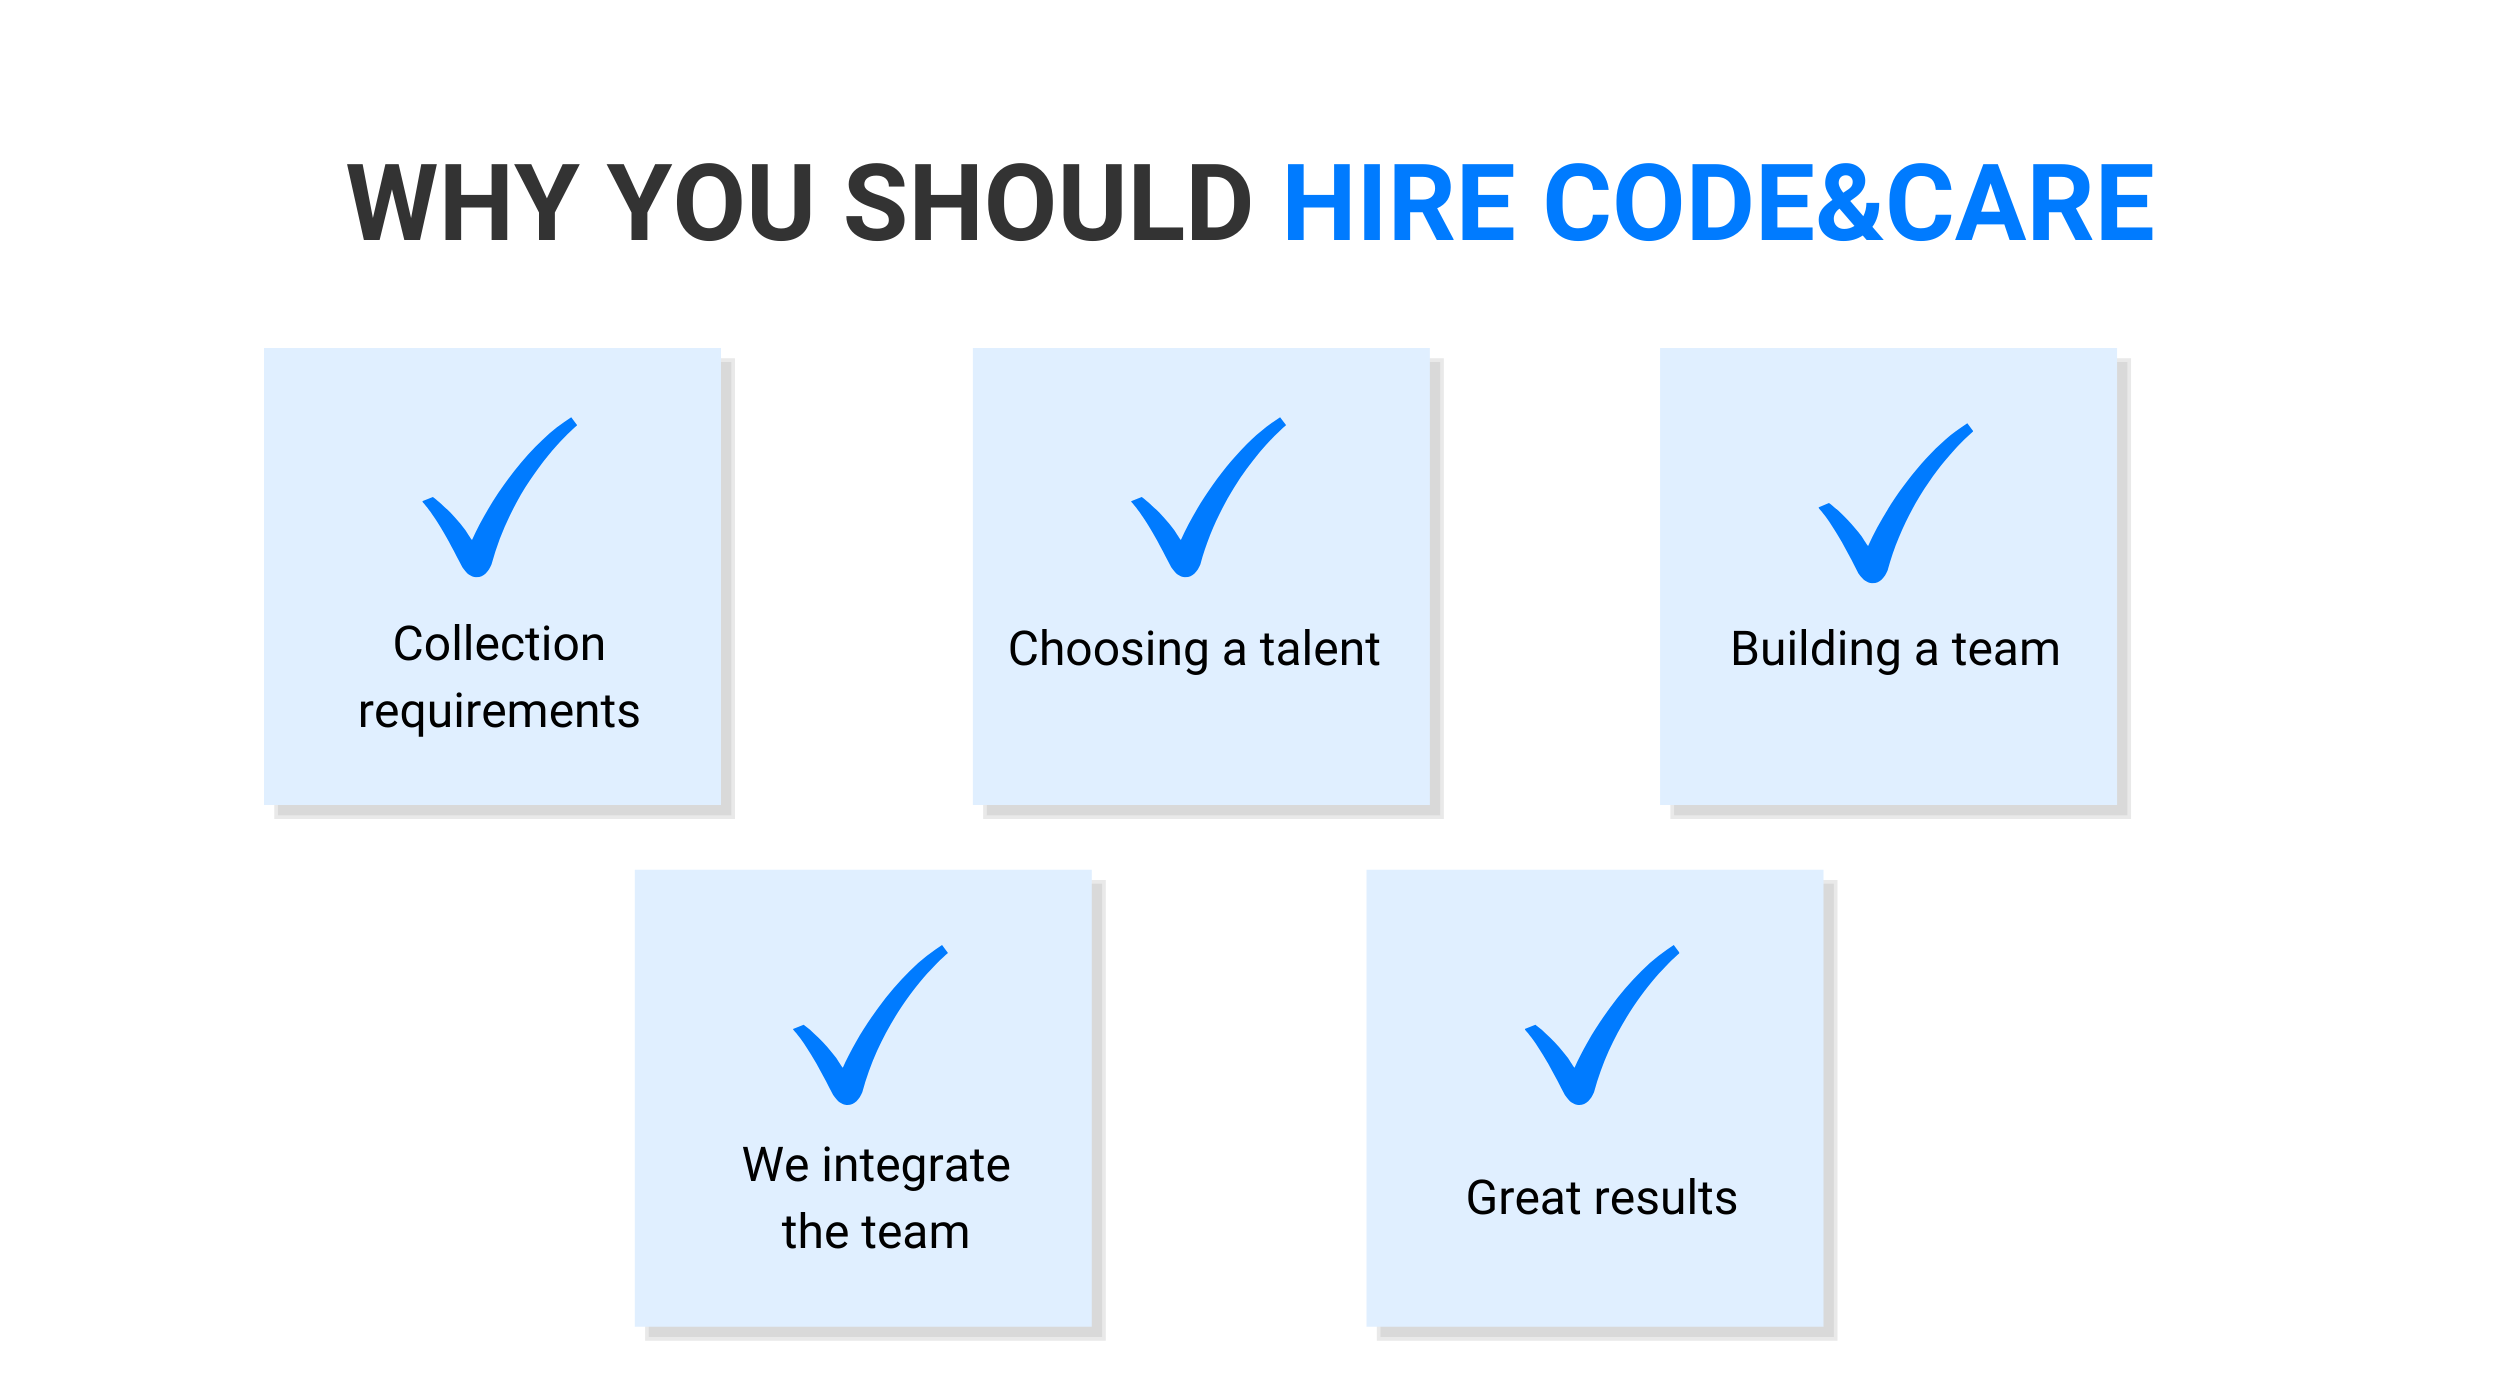 Why You Should Hire Code&Care